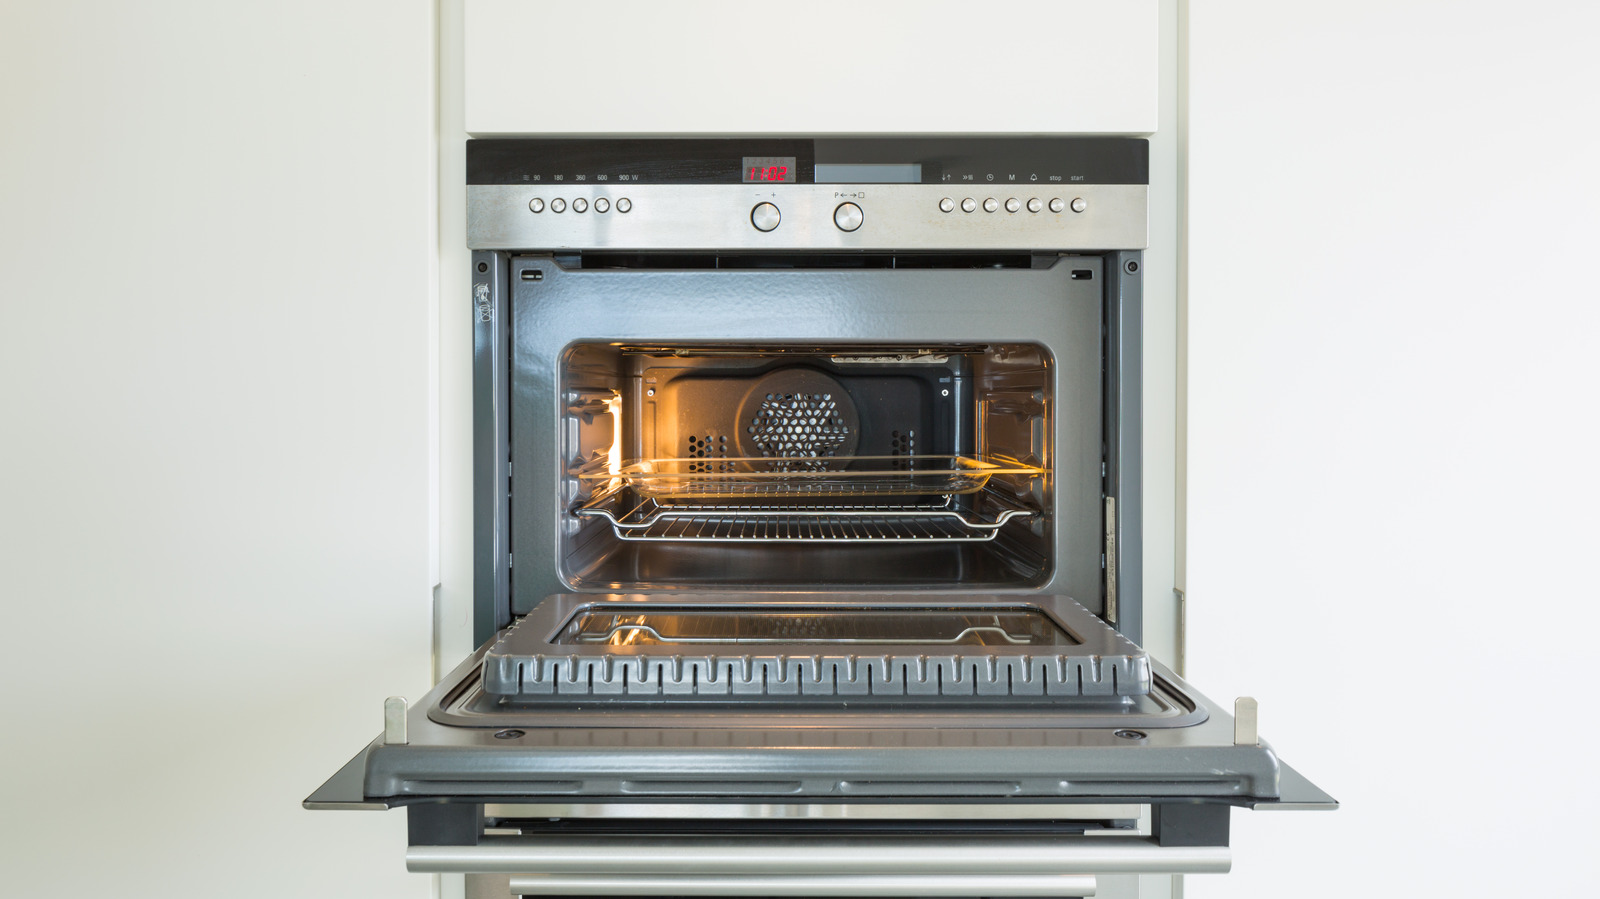 How to Multi-Rack Cook in Your Convection Oven for the Holidays